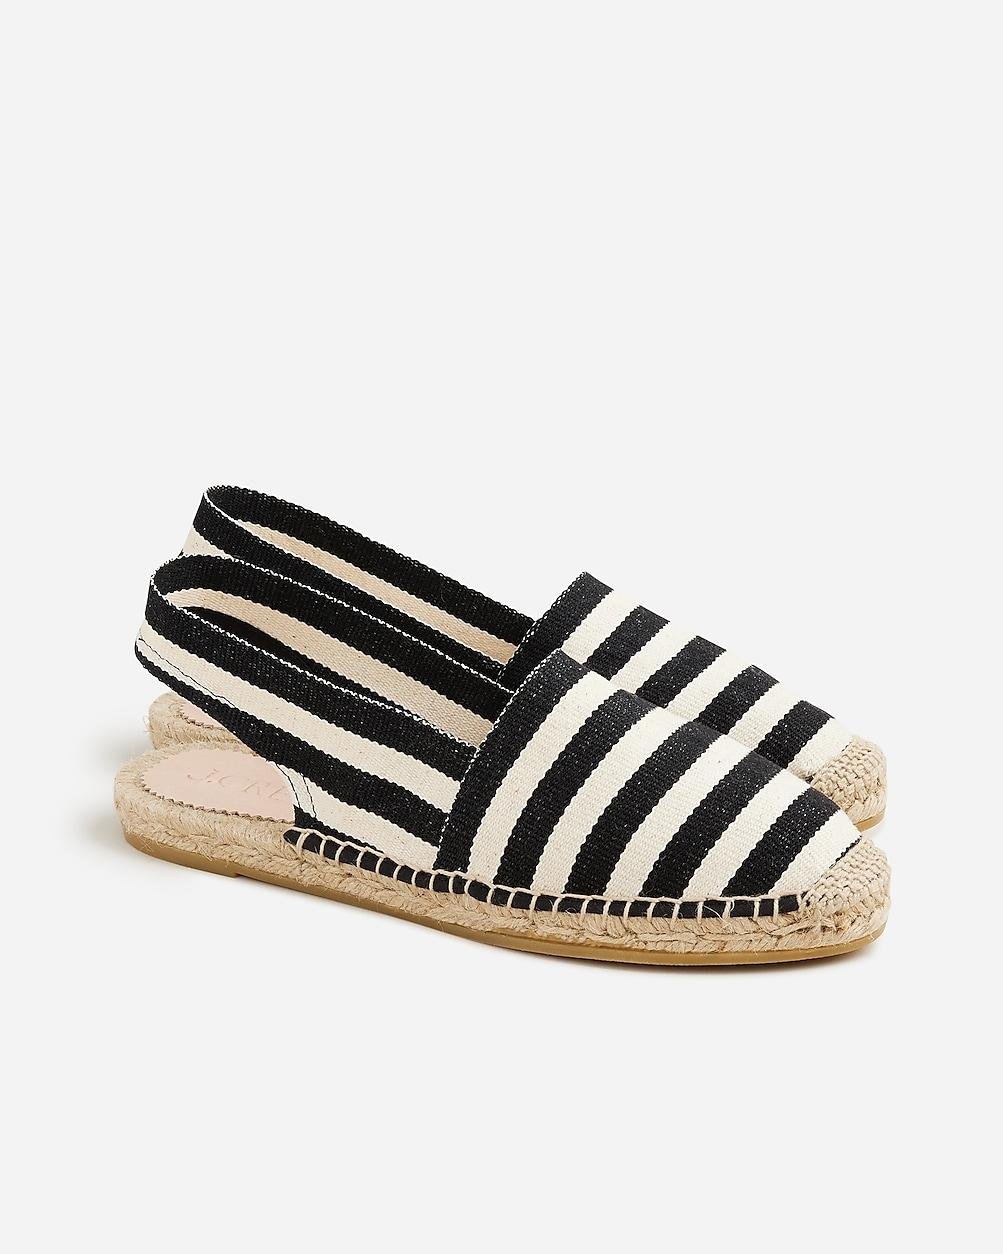 Made-in-Spain slingback espadrille sandals by J.CREW